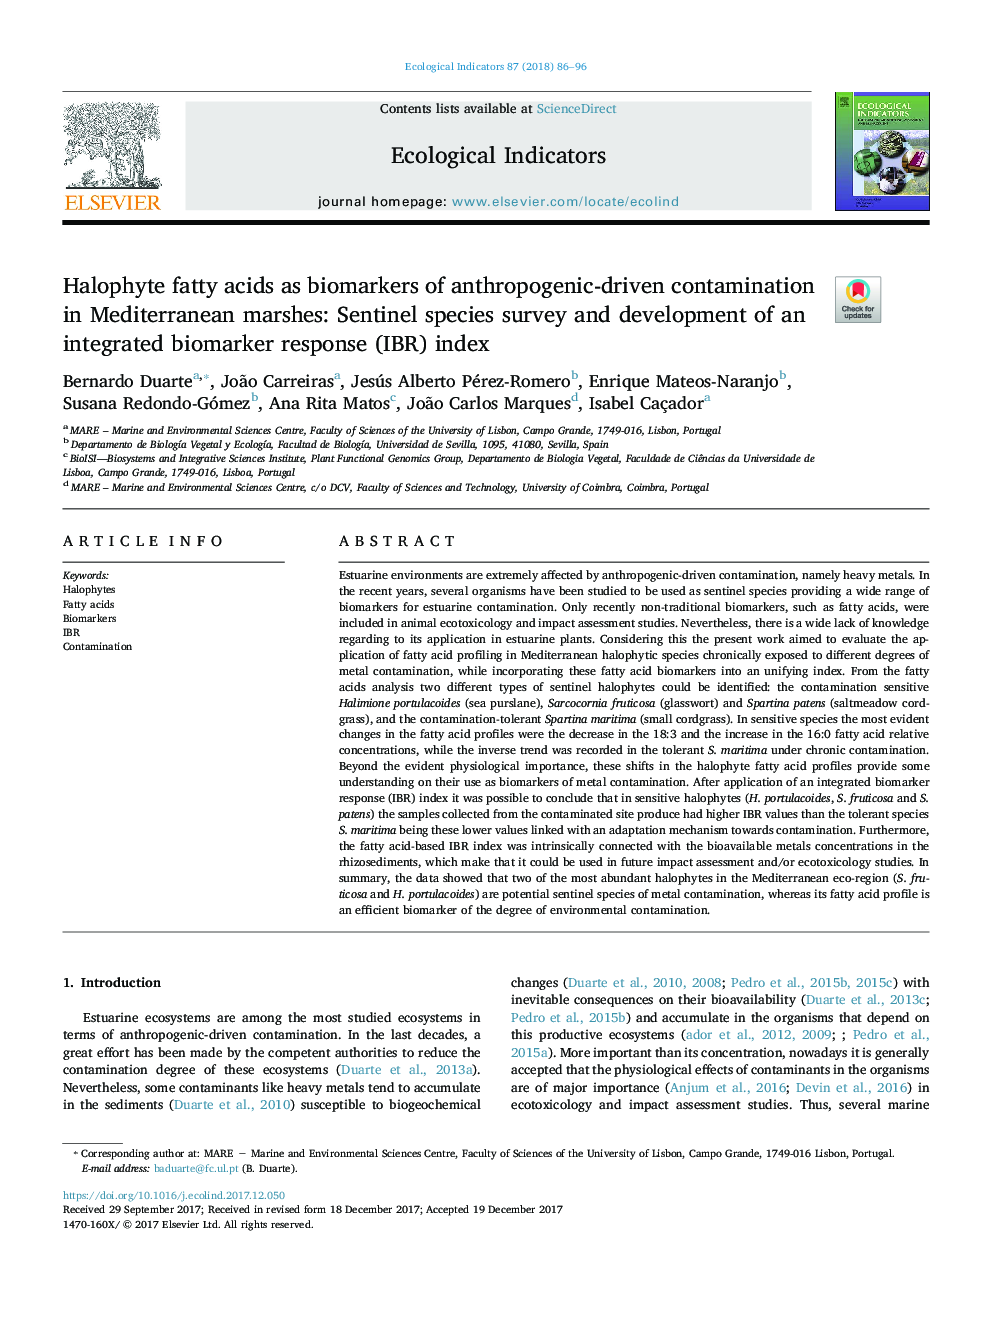 Halophyte fatty acids as biomarkers of anthropogenic-driven contamination in Mediterranean marshes: Sentinel species survey and development of an integrated biomarker response (IBR) index